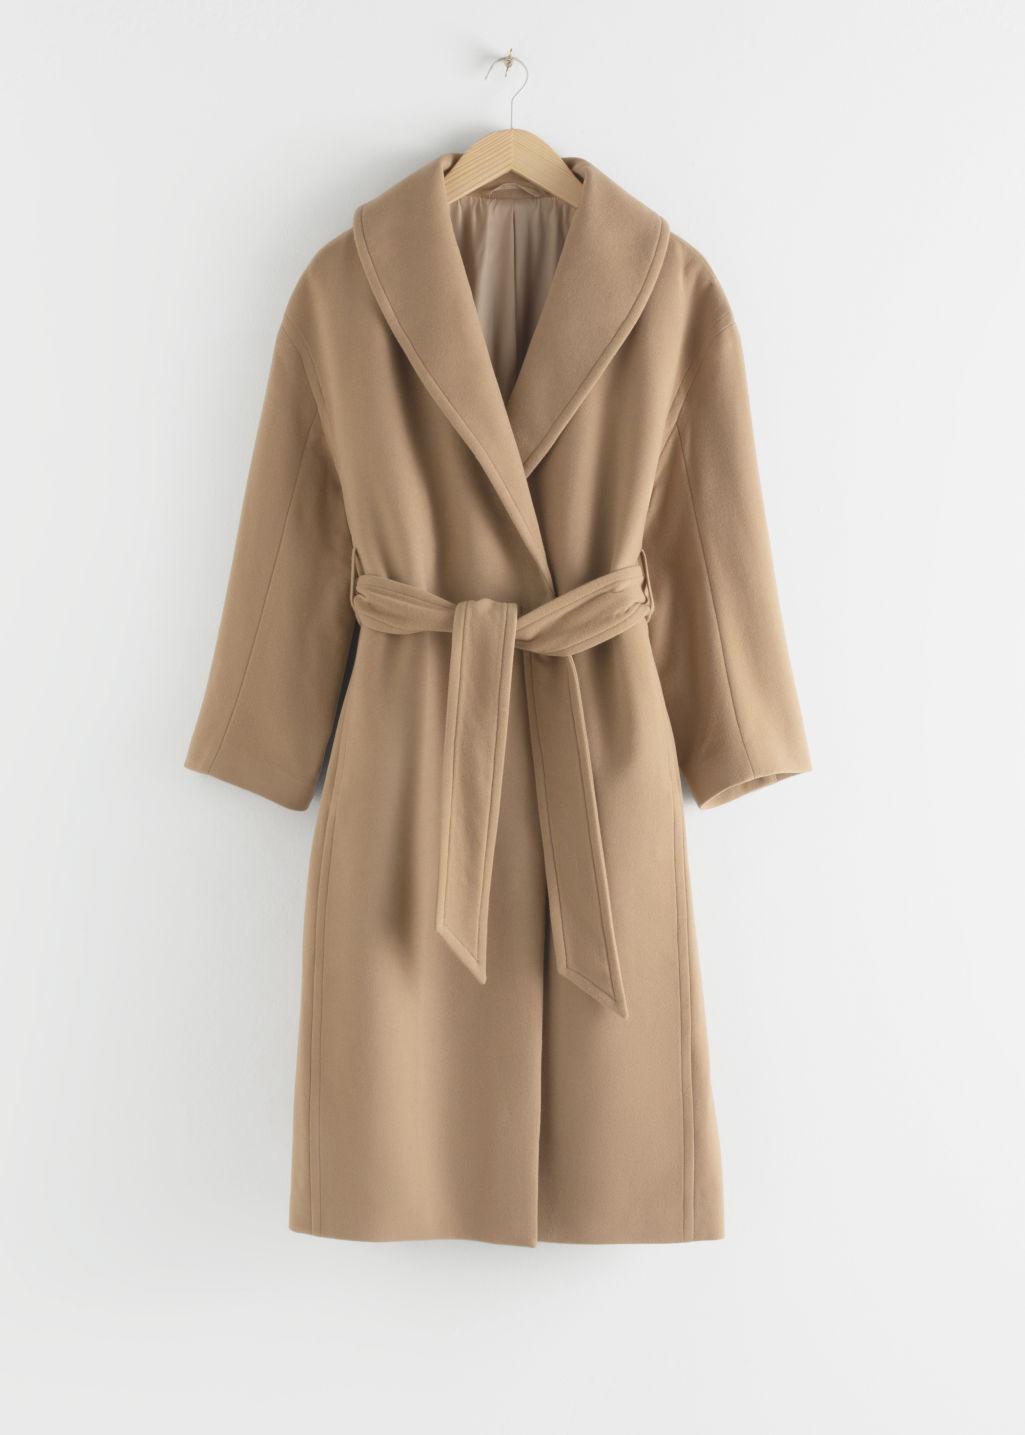 & Other Stories Belted Wool Blend Long Coat in Beige (Natural) - Lyst